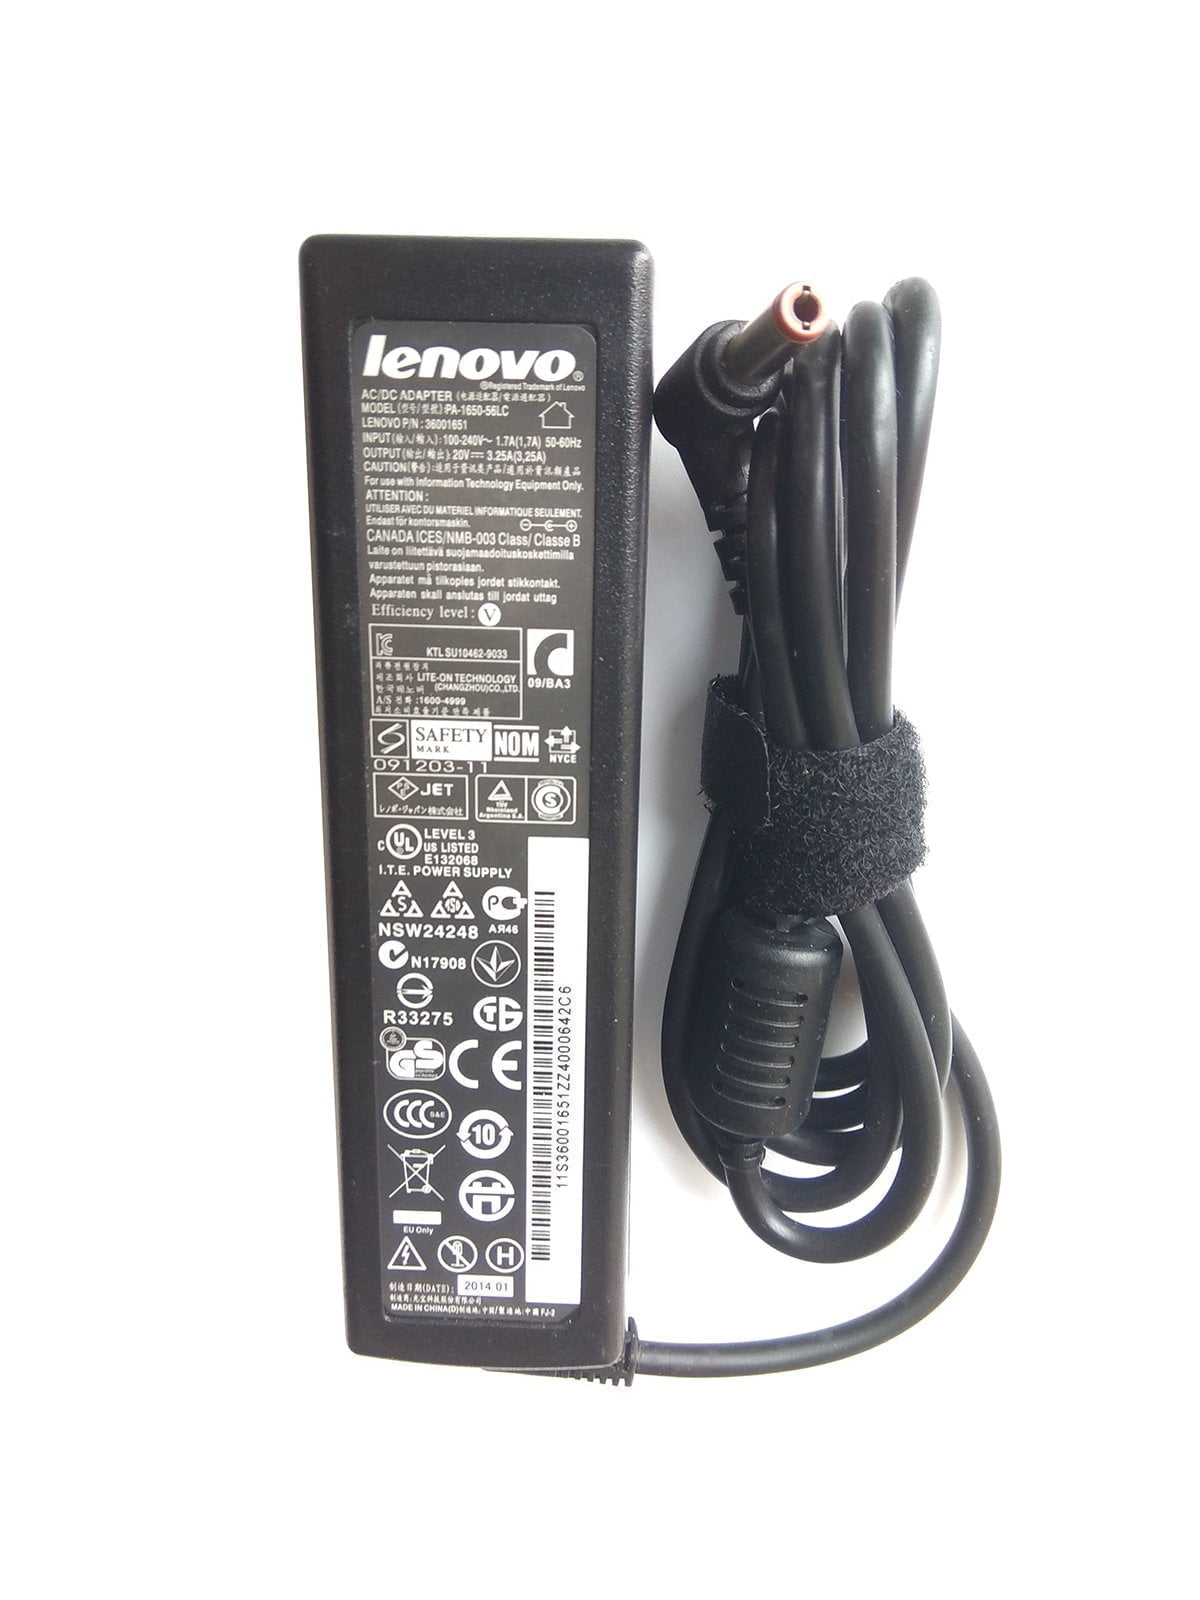 Lenovo 65w Original Laptop Charger - 20V 3.25A Genuine AC Power Adapter (2.5 mm) L09S6Y02